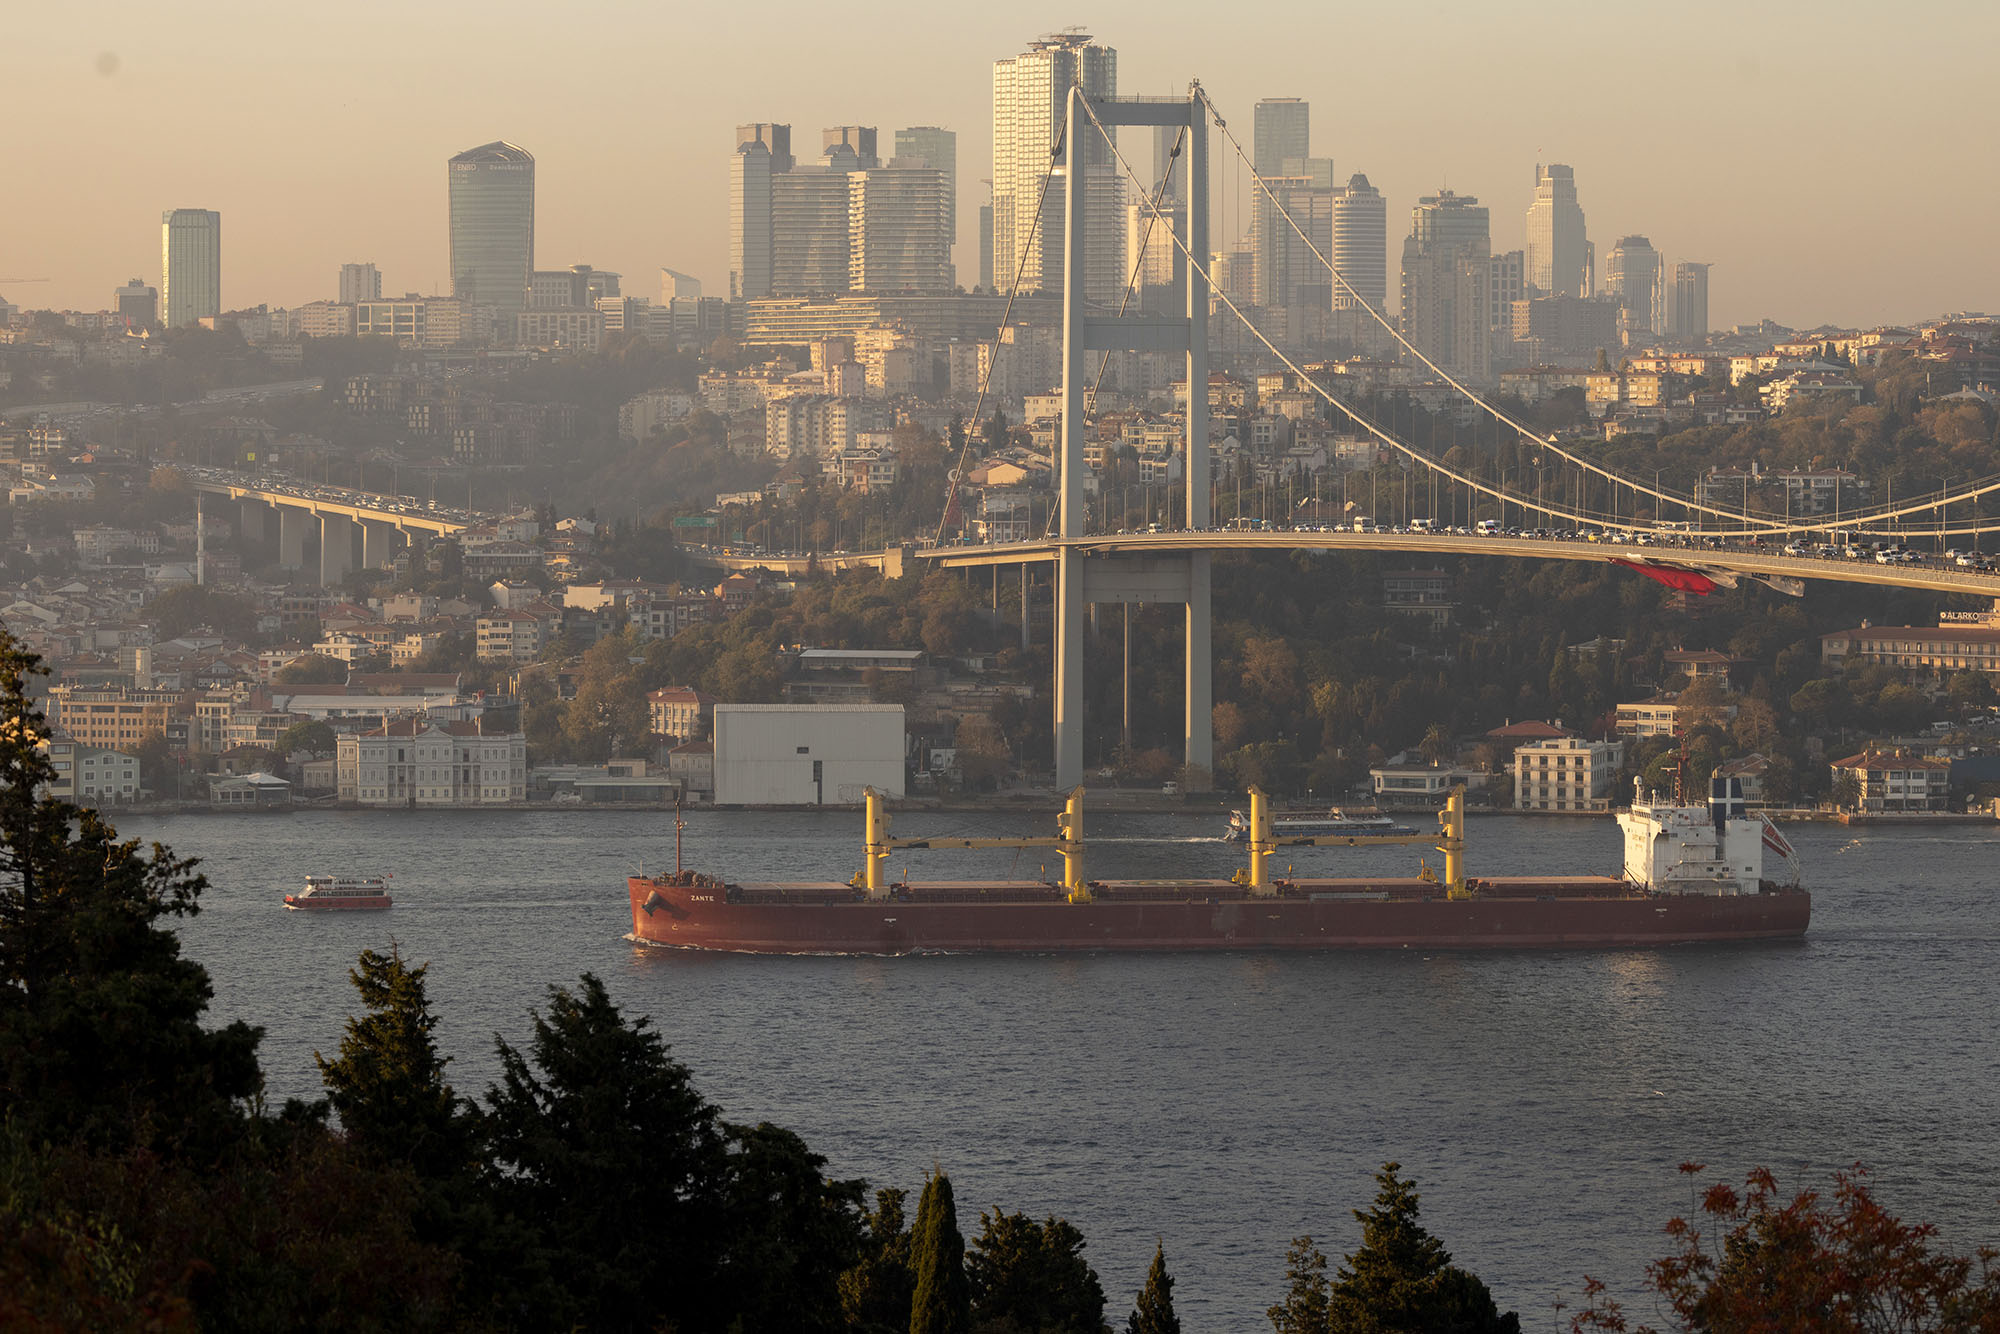 The Malta flagged bulk carrier Zante en-route to Belgium transits the Bosphorus carrying 47,270 metric tons of rapeseed from Ukraine on November 2, in Istanbul, Turkey.